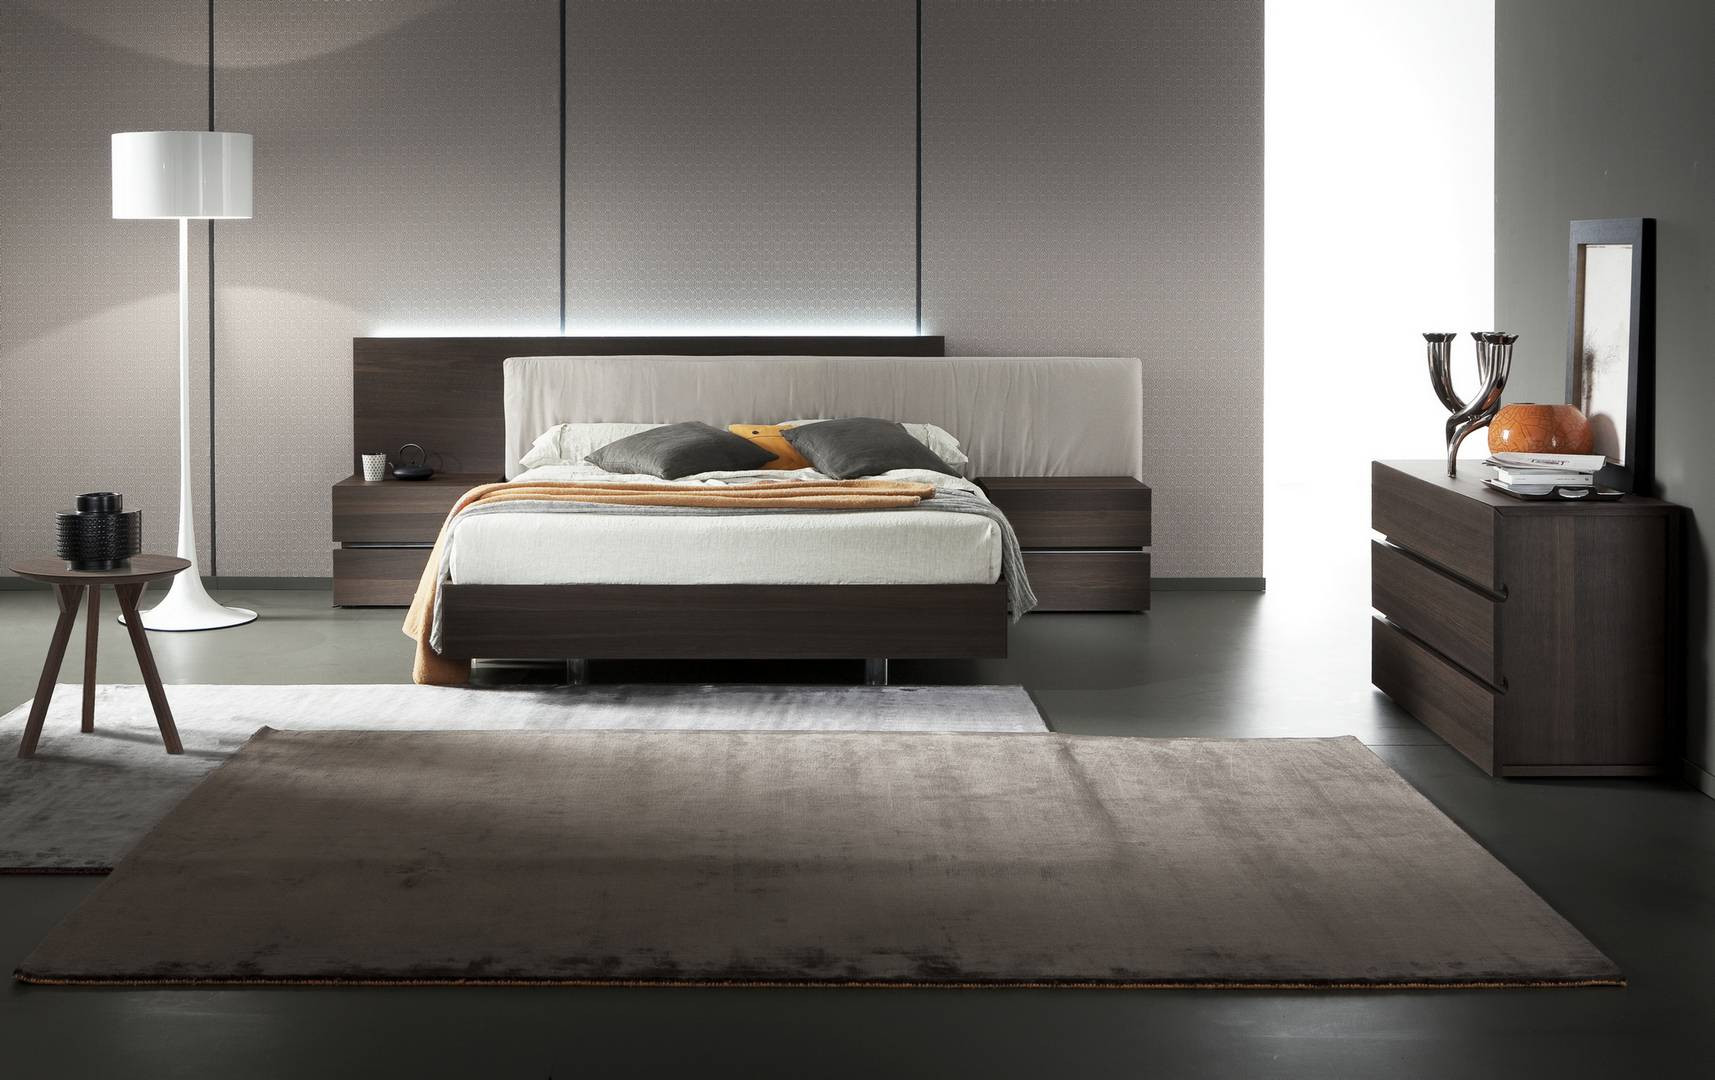 Modern Wood Bedroom Furniture
 Made in Italy Wood Modern Contemporary Bedroom Sets San